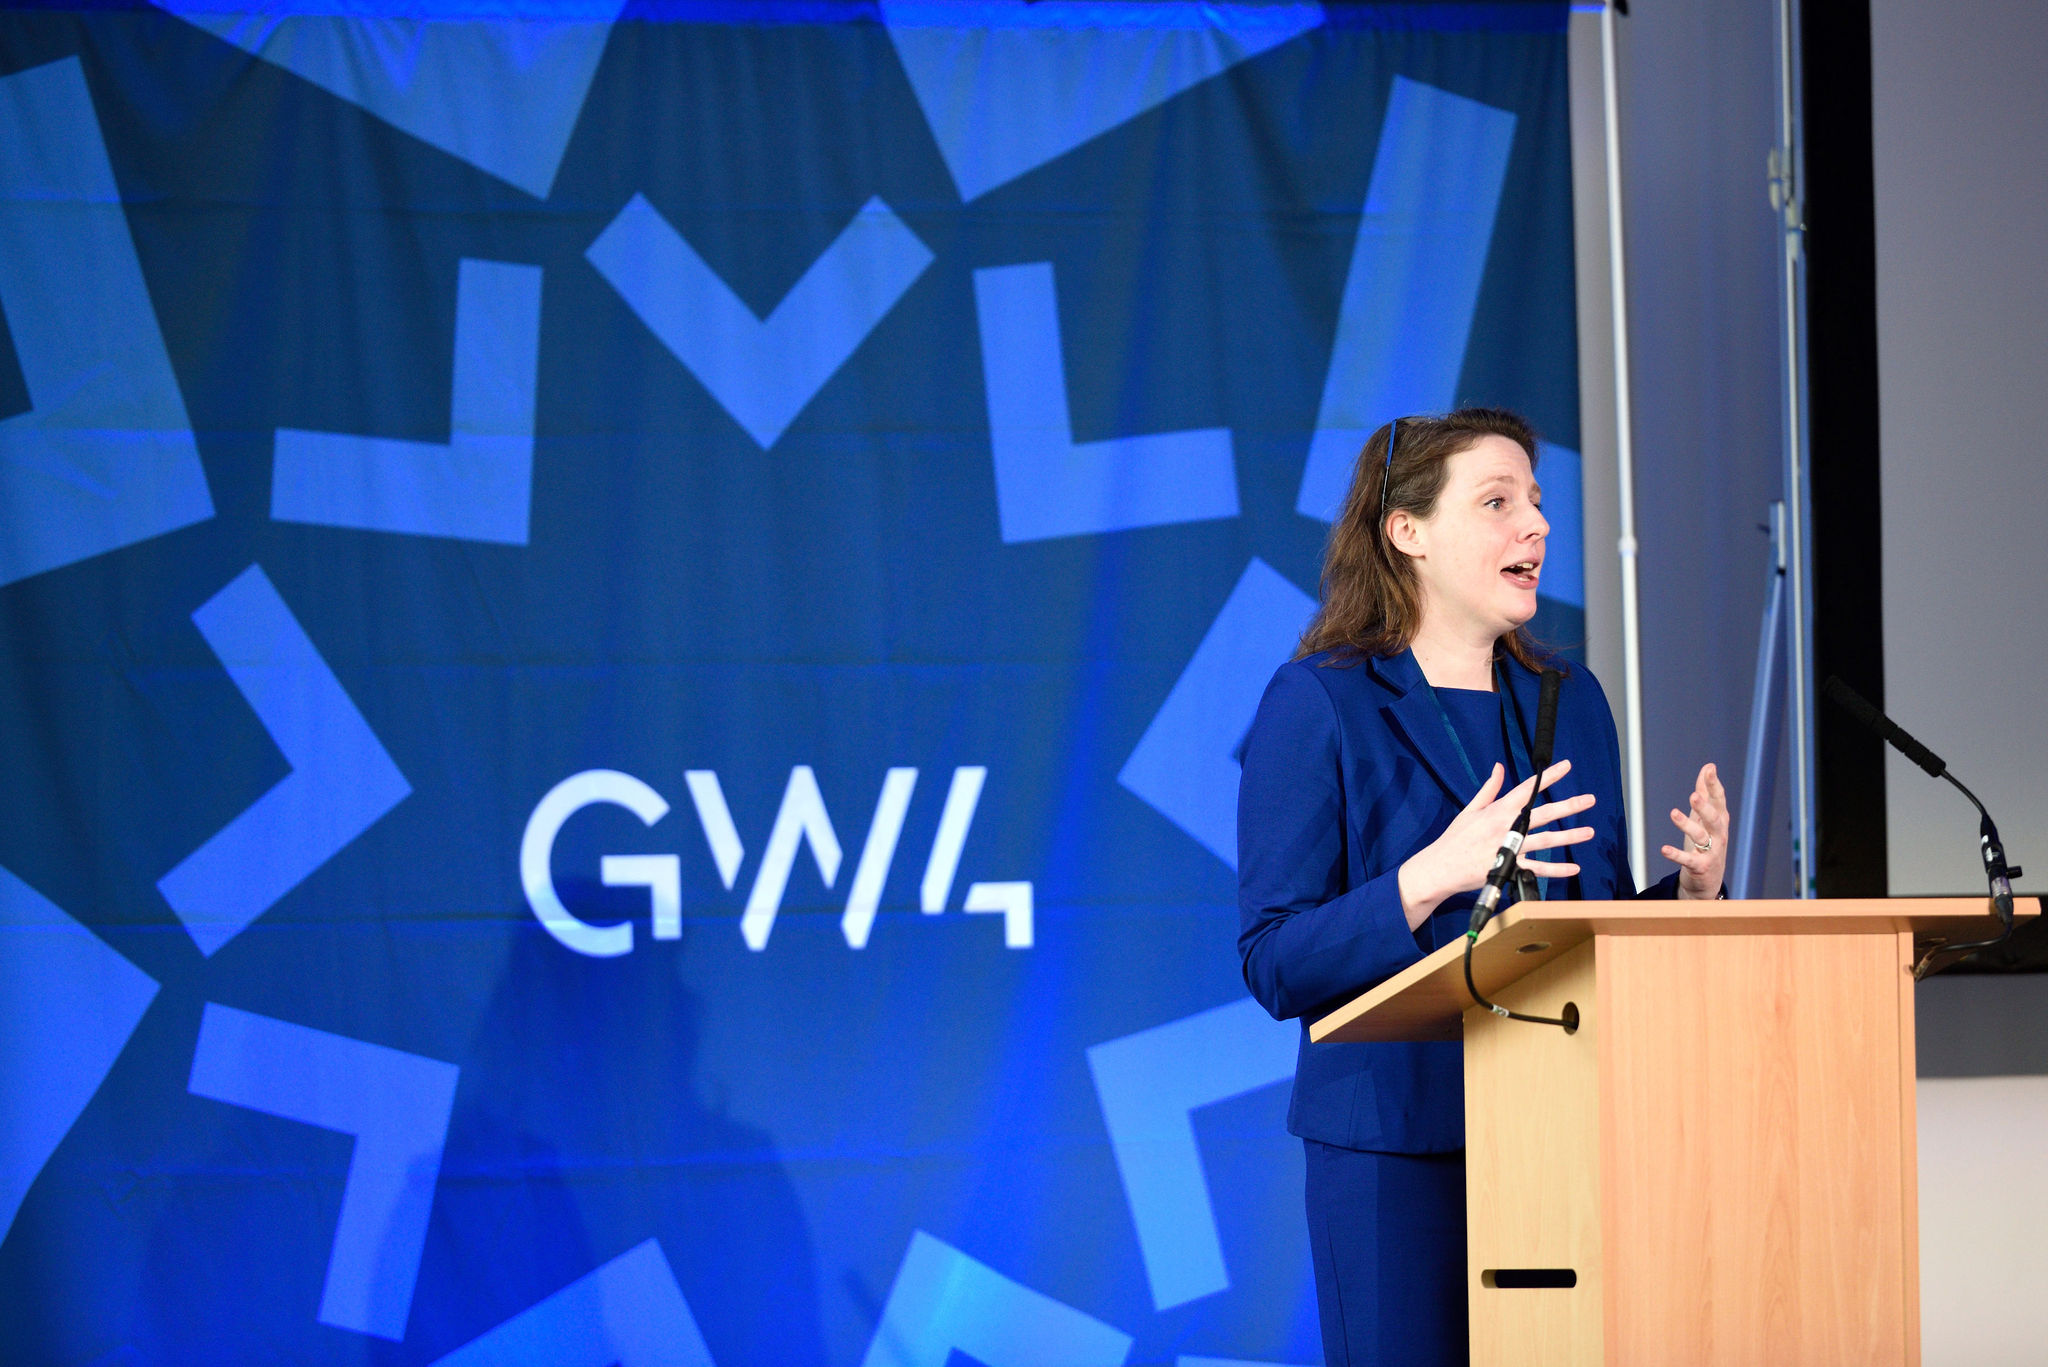 GW4 Alliance Director, Dr Joanna Jenkinson MBE, welcomes attendees to GW4 10 year event